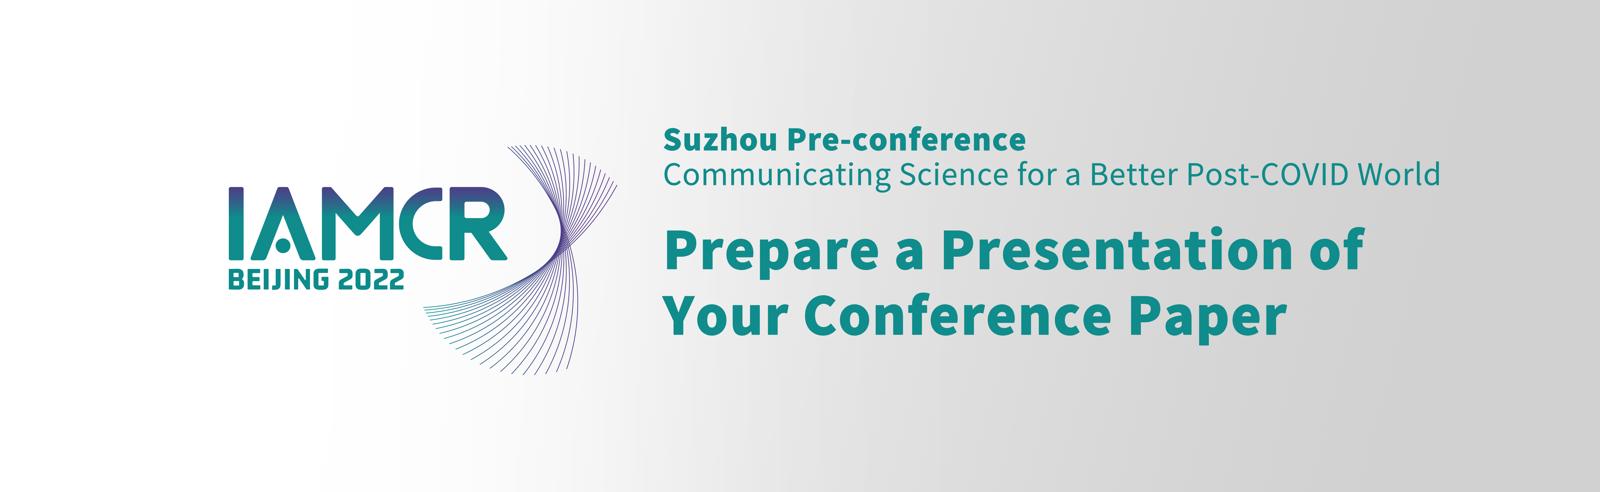 Prepare a Presentation of your Conference Paper